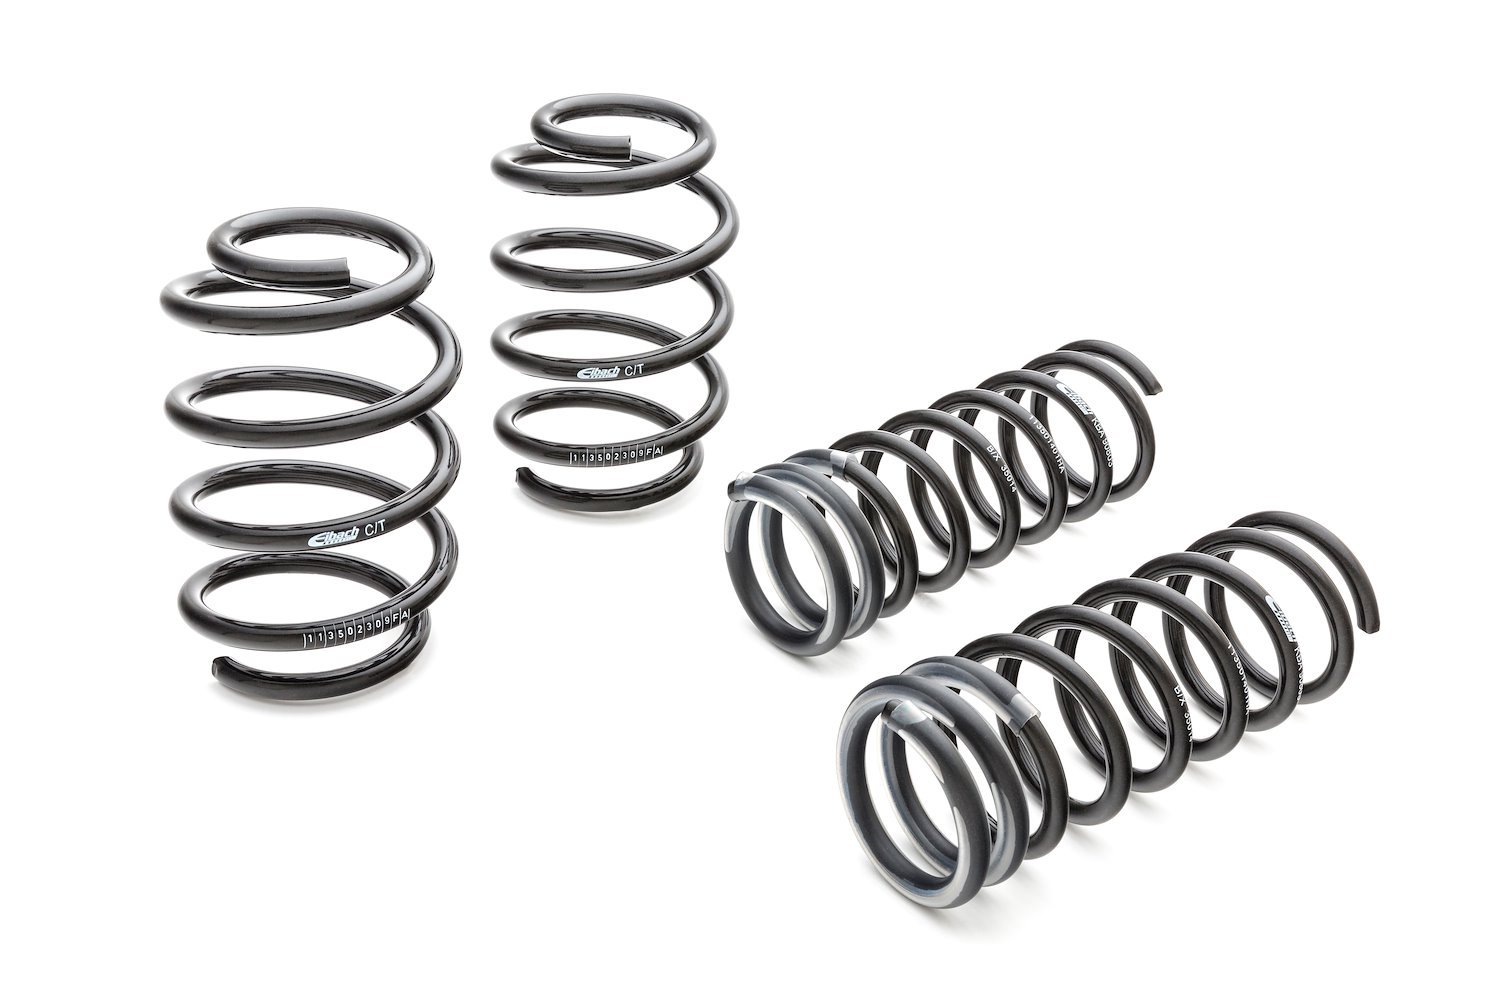 8273.140 Pro-Kit Lowering Springs 2004-2006 Camry - 1.600 in. Front/Rear Drop